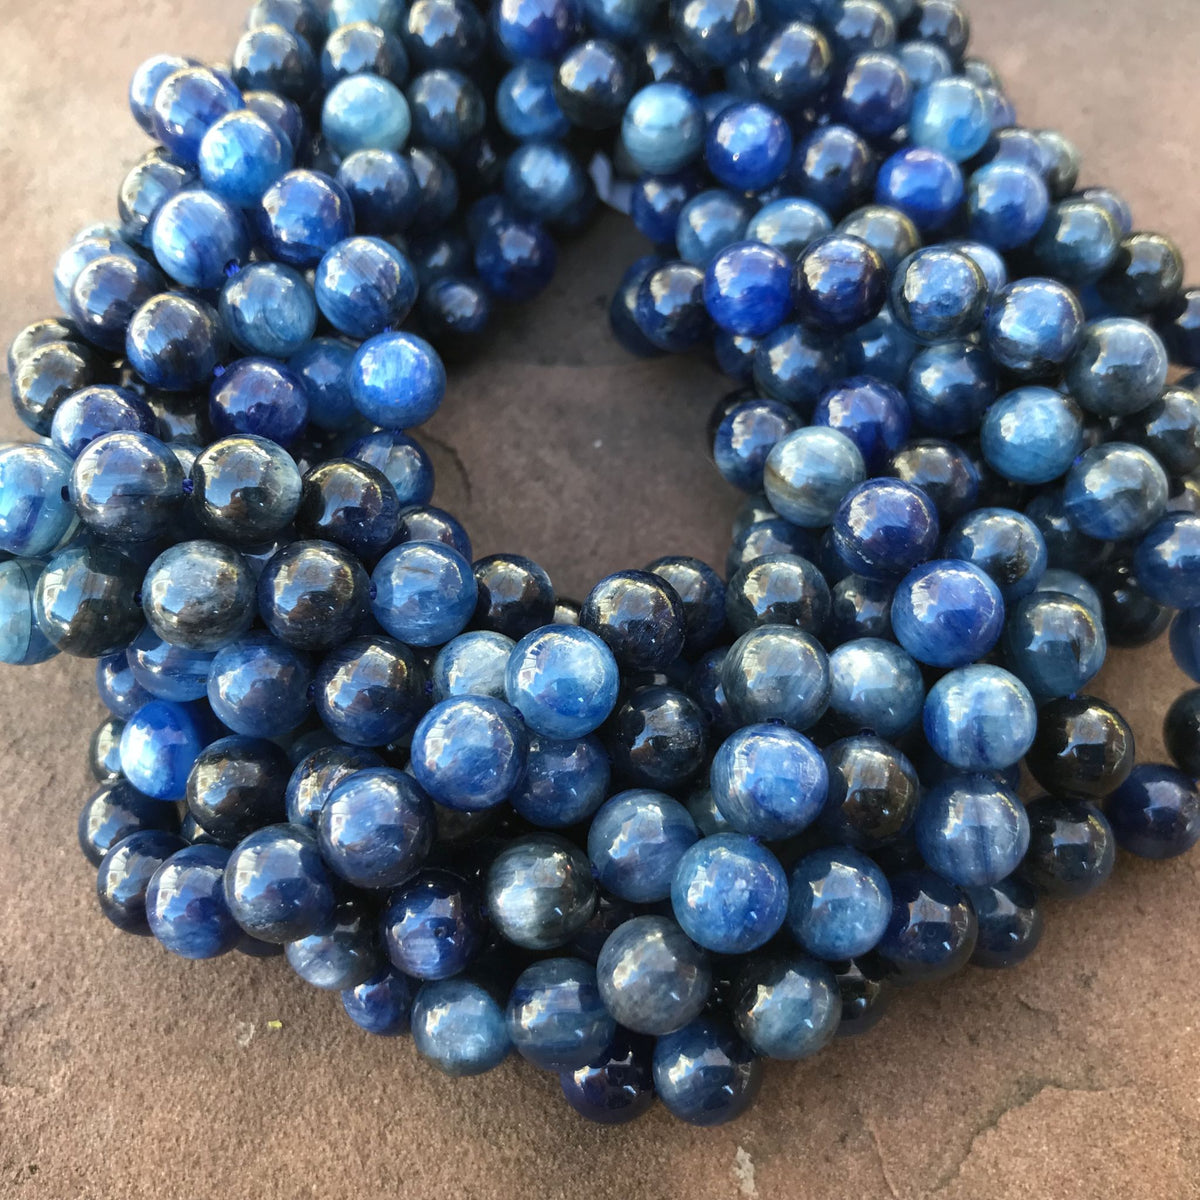 Buy Kyanite 8mm Beads for Mala Necklace Making!